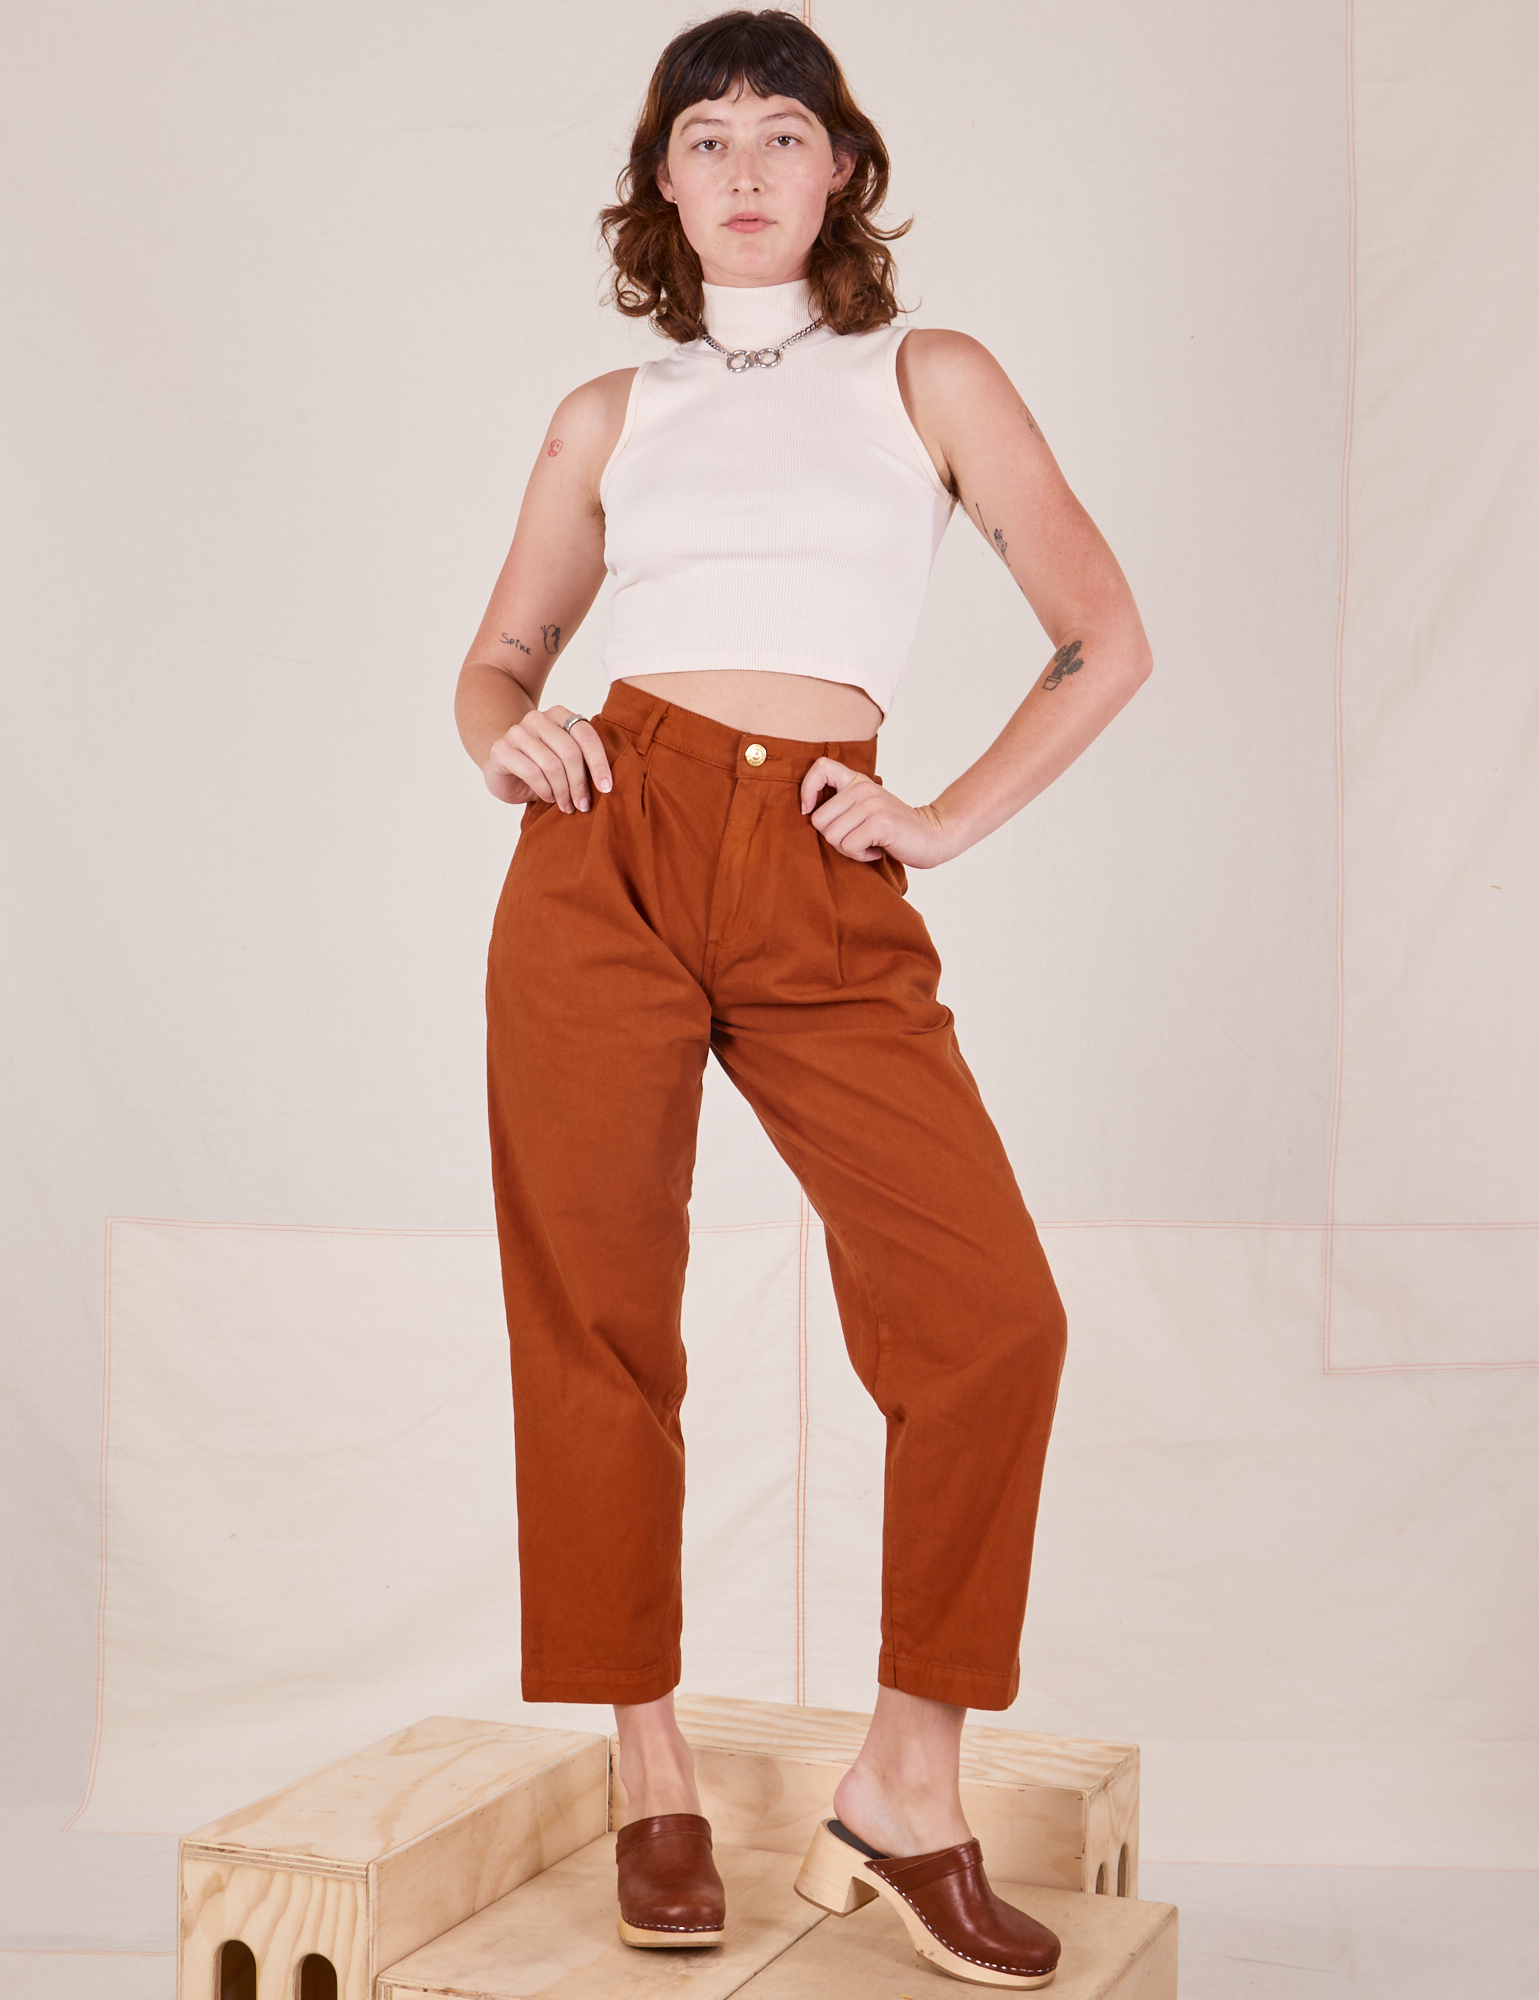 Alex is wearing Heavyweight Trousers in Burnt Terracotta and Sleeveless Turtleneck in vintage tee off-white